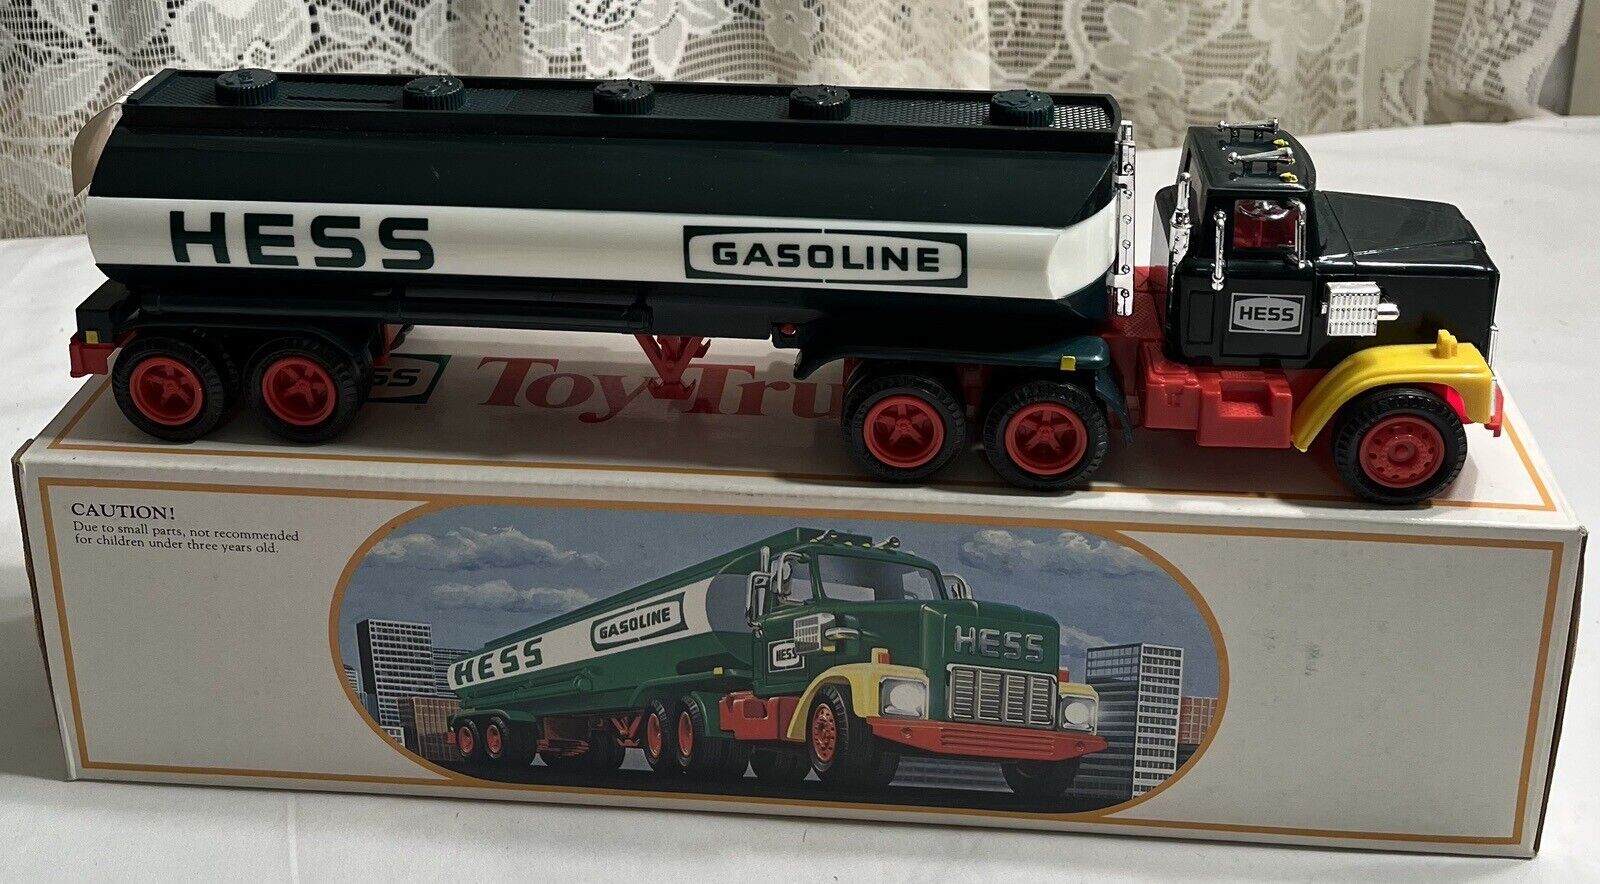 Vintage 1984 Hess Toy Oil Tanker Truck - New In Box